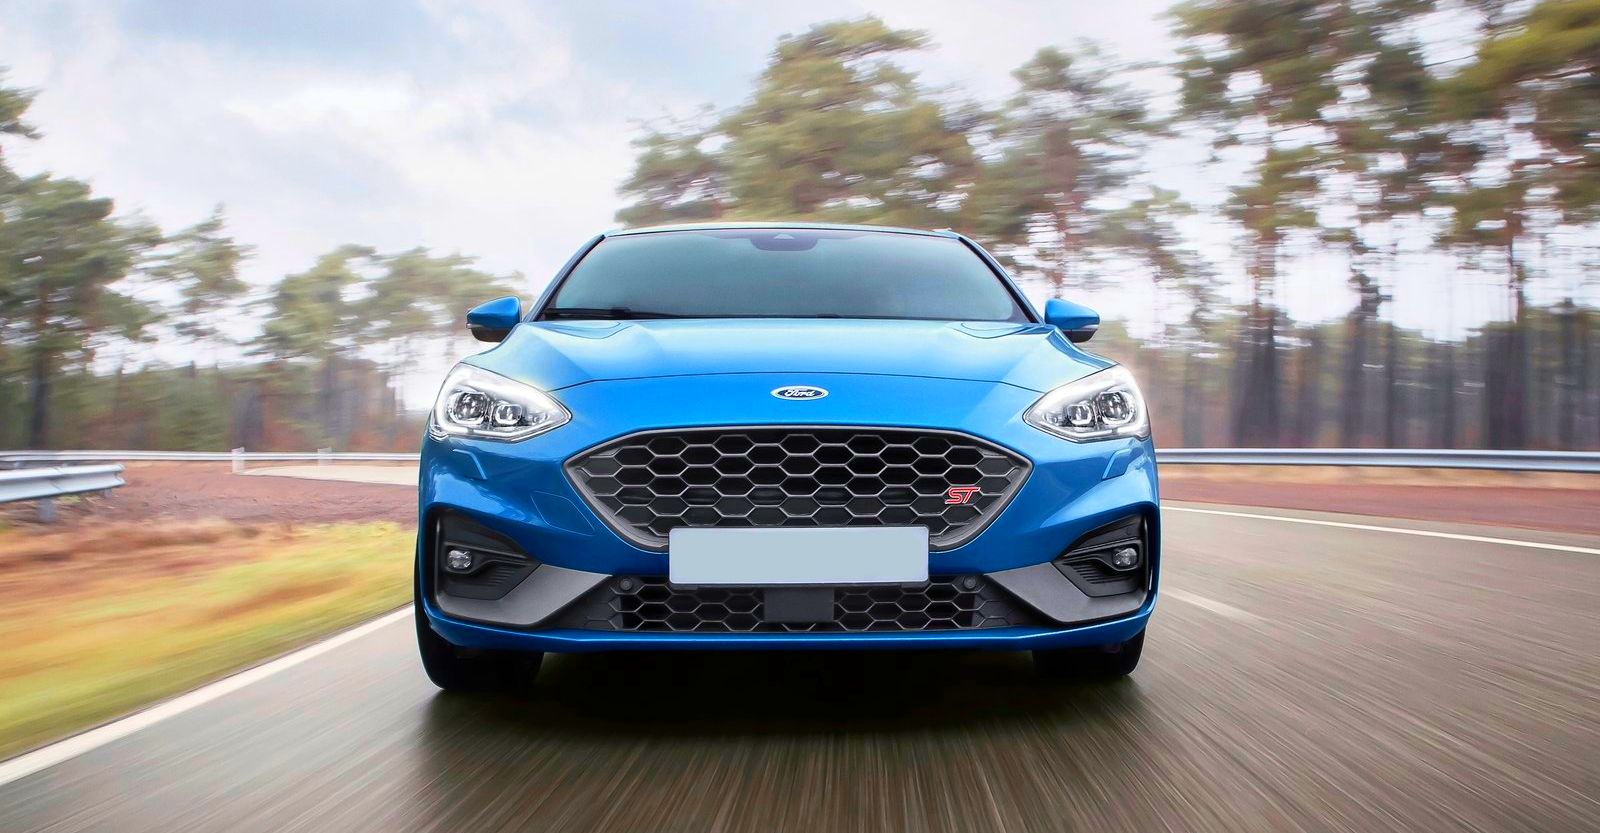 Ford Focus On Road Price (Petrol), Features & Specs, Images